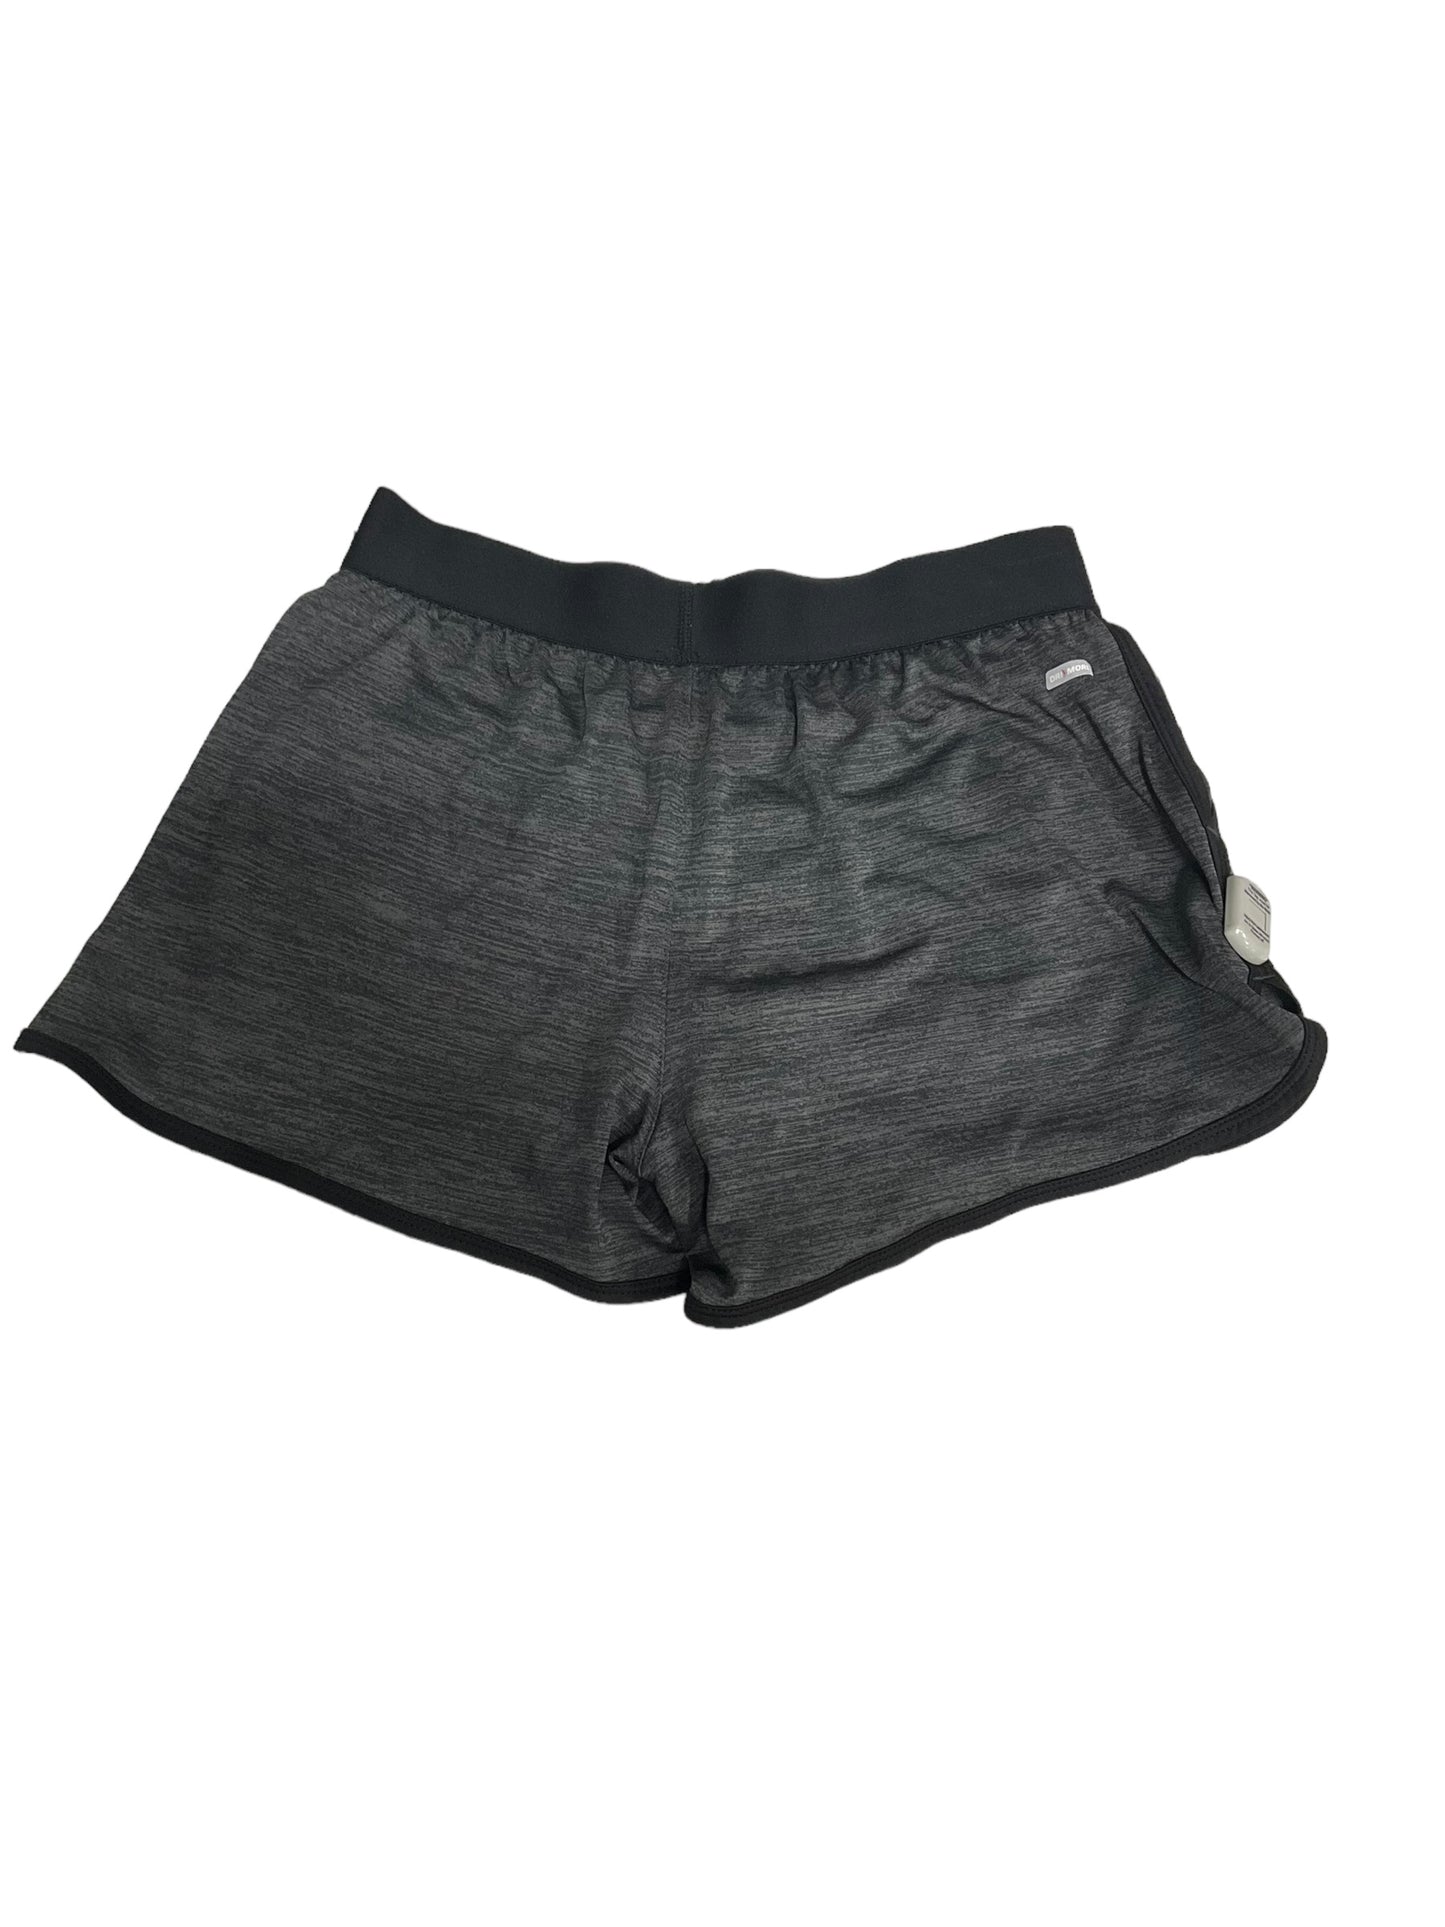 Athletic Shorts By Danskin Now  Size: S